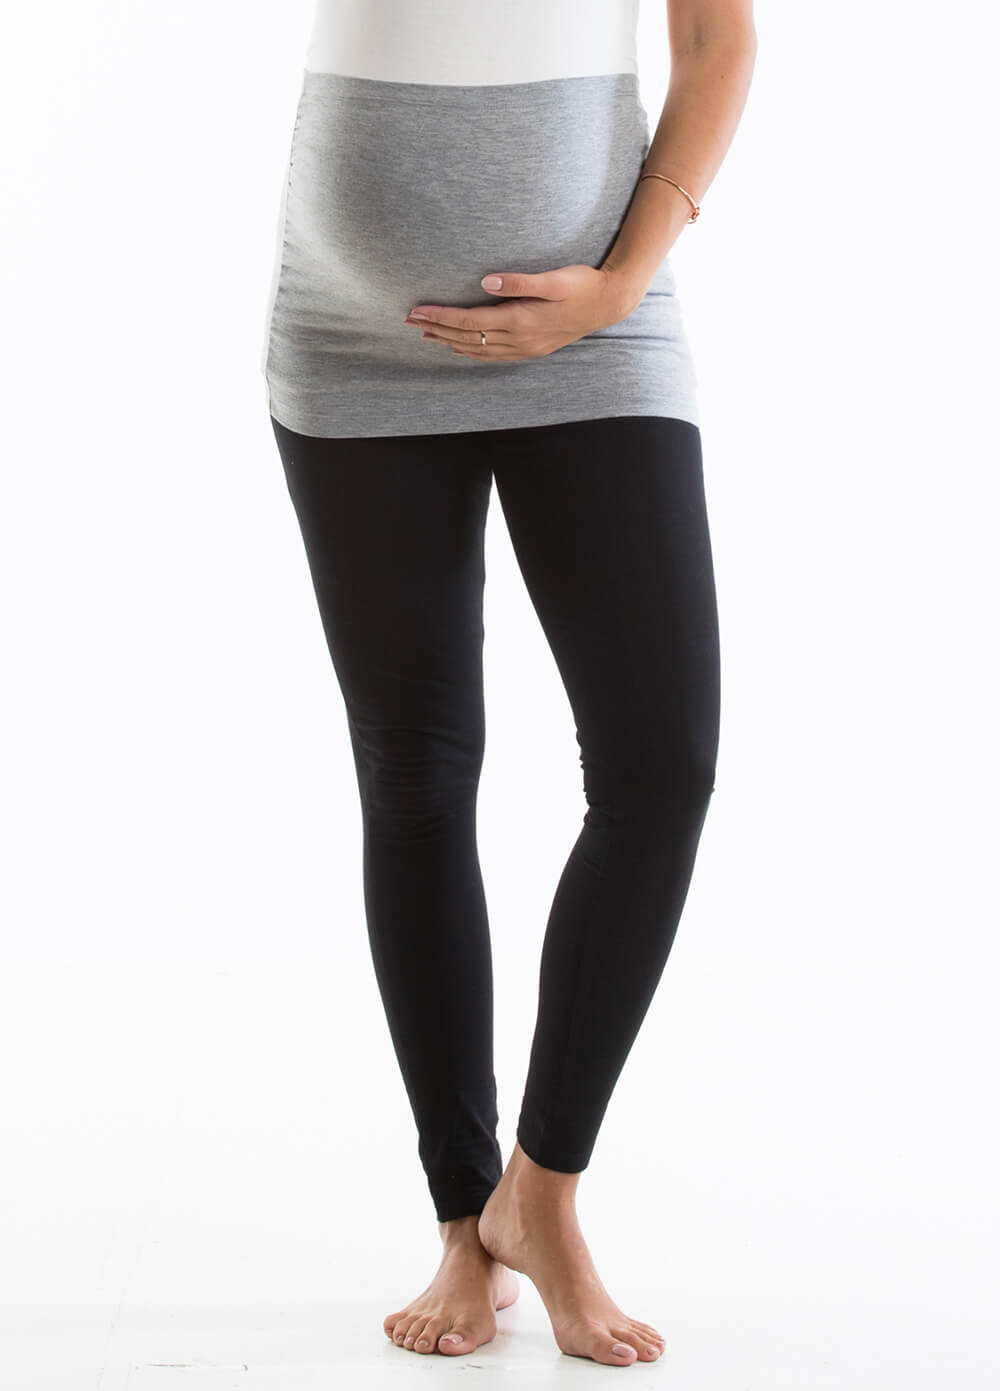 Maternity Belly Band in Grey by Trimester Clothing